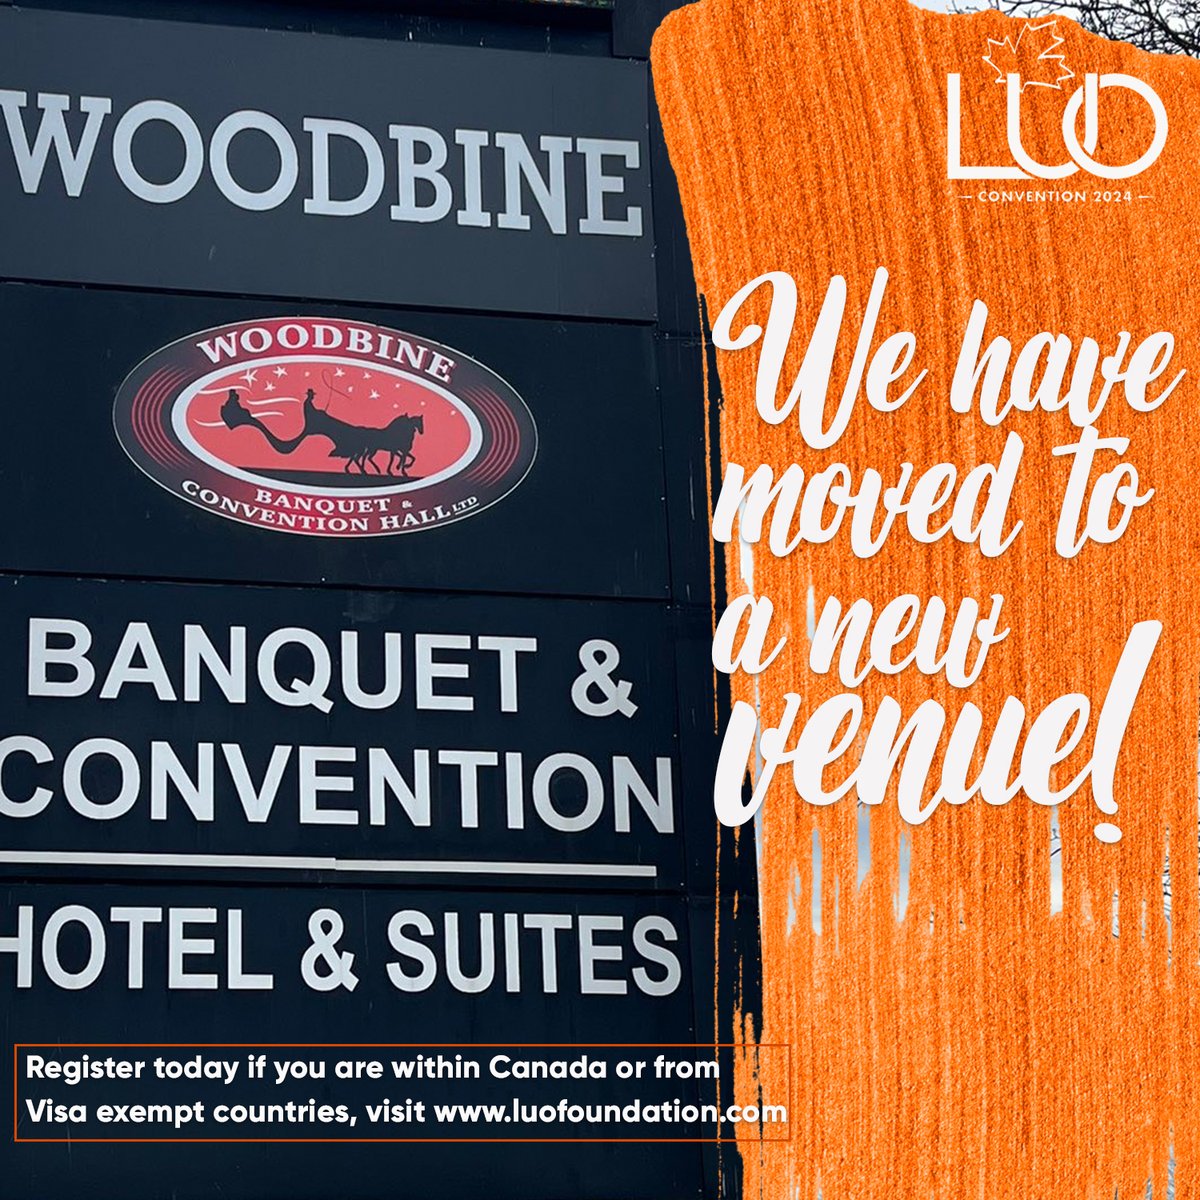 We have moved to a new venue!

Join us with your friends for a 3 days fun loving event at Woodbine banquet and convention hall in Etobicoke, Ontario. Register today if you are within Canada or from Visa exempt countries,
visit con.luofoundation.org/events/luo-con… 
#luoconvention2024